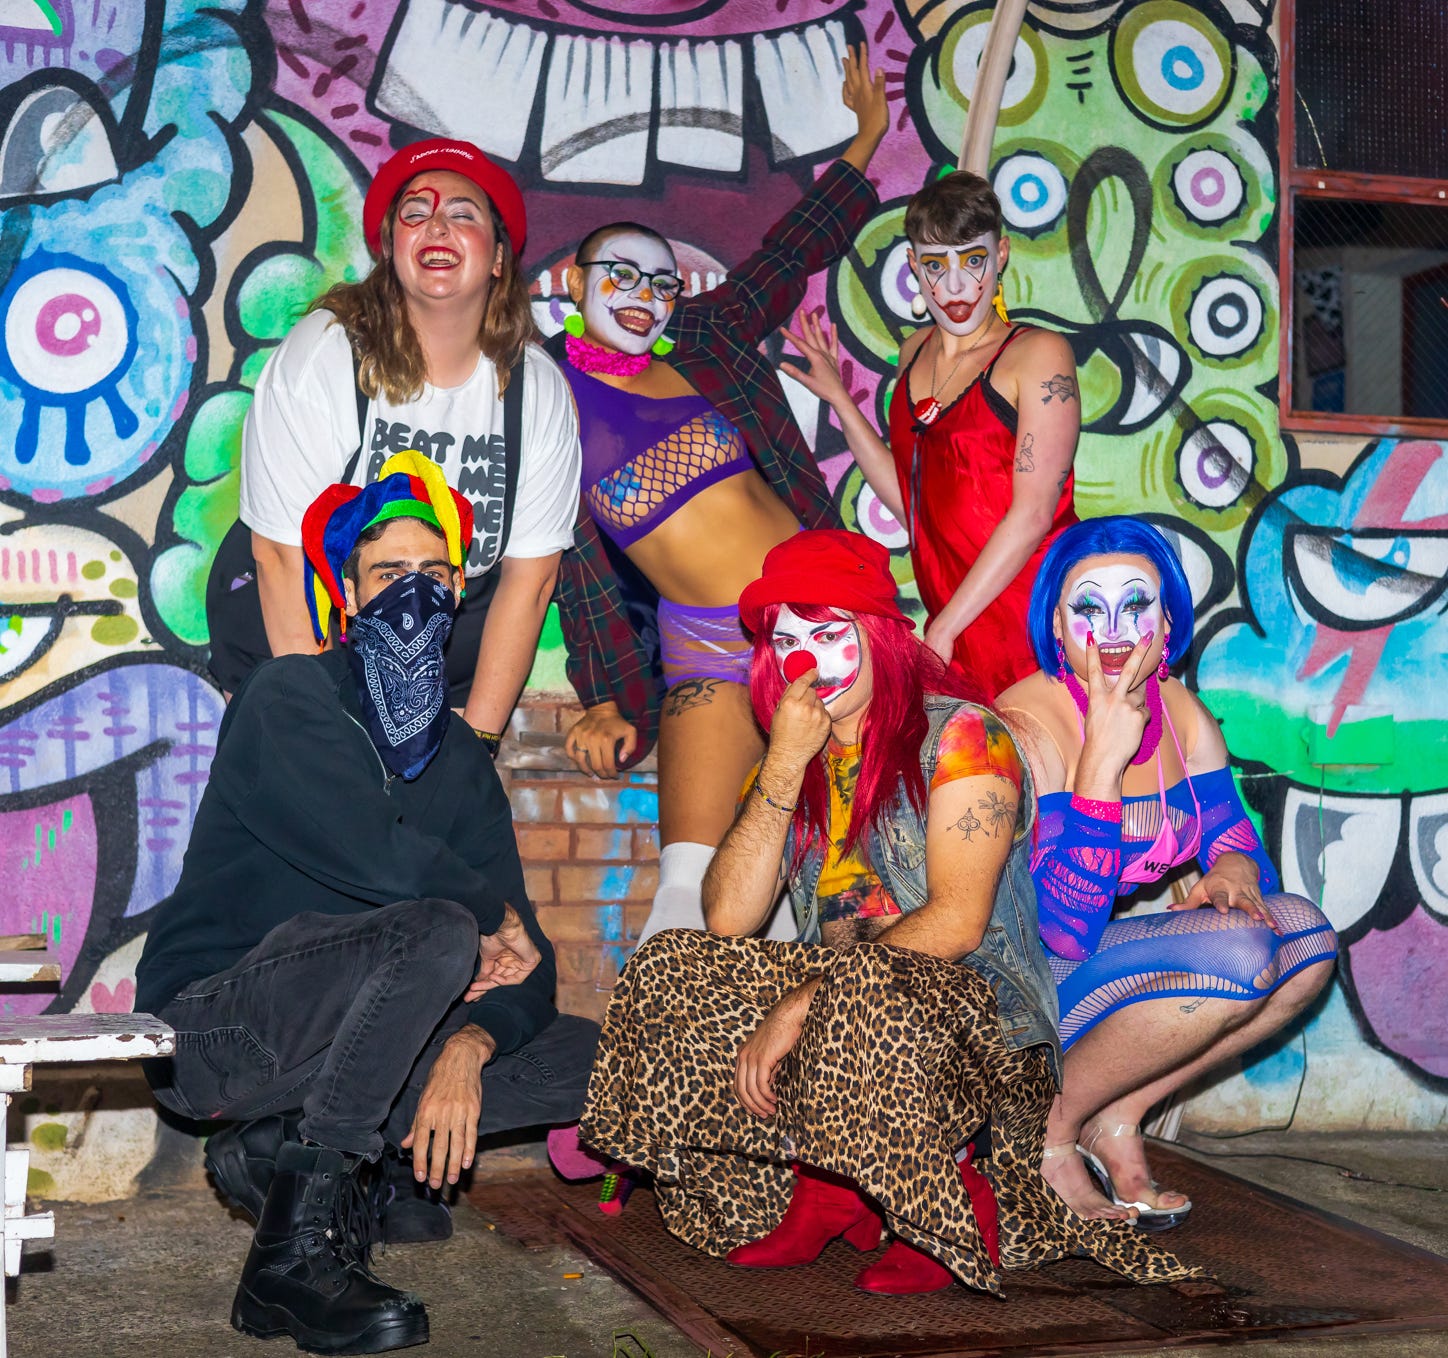 Caty, Cochina Divina, Cassidy Dawn Graves, Jester of No Court, Babz, and Tank pose in clown outfits in front of colorful wall mural outside queers n peers variety show